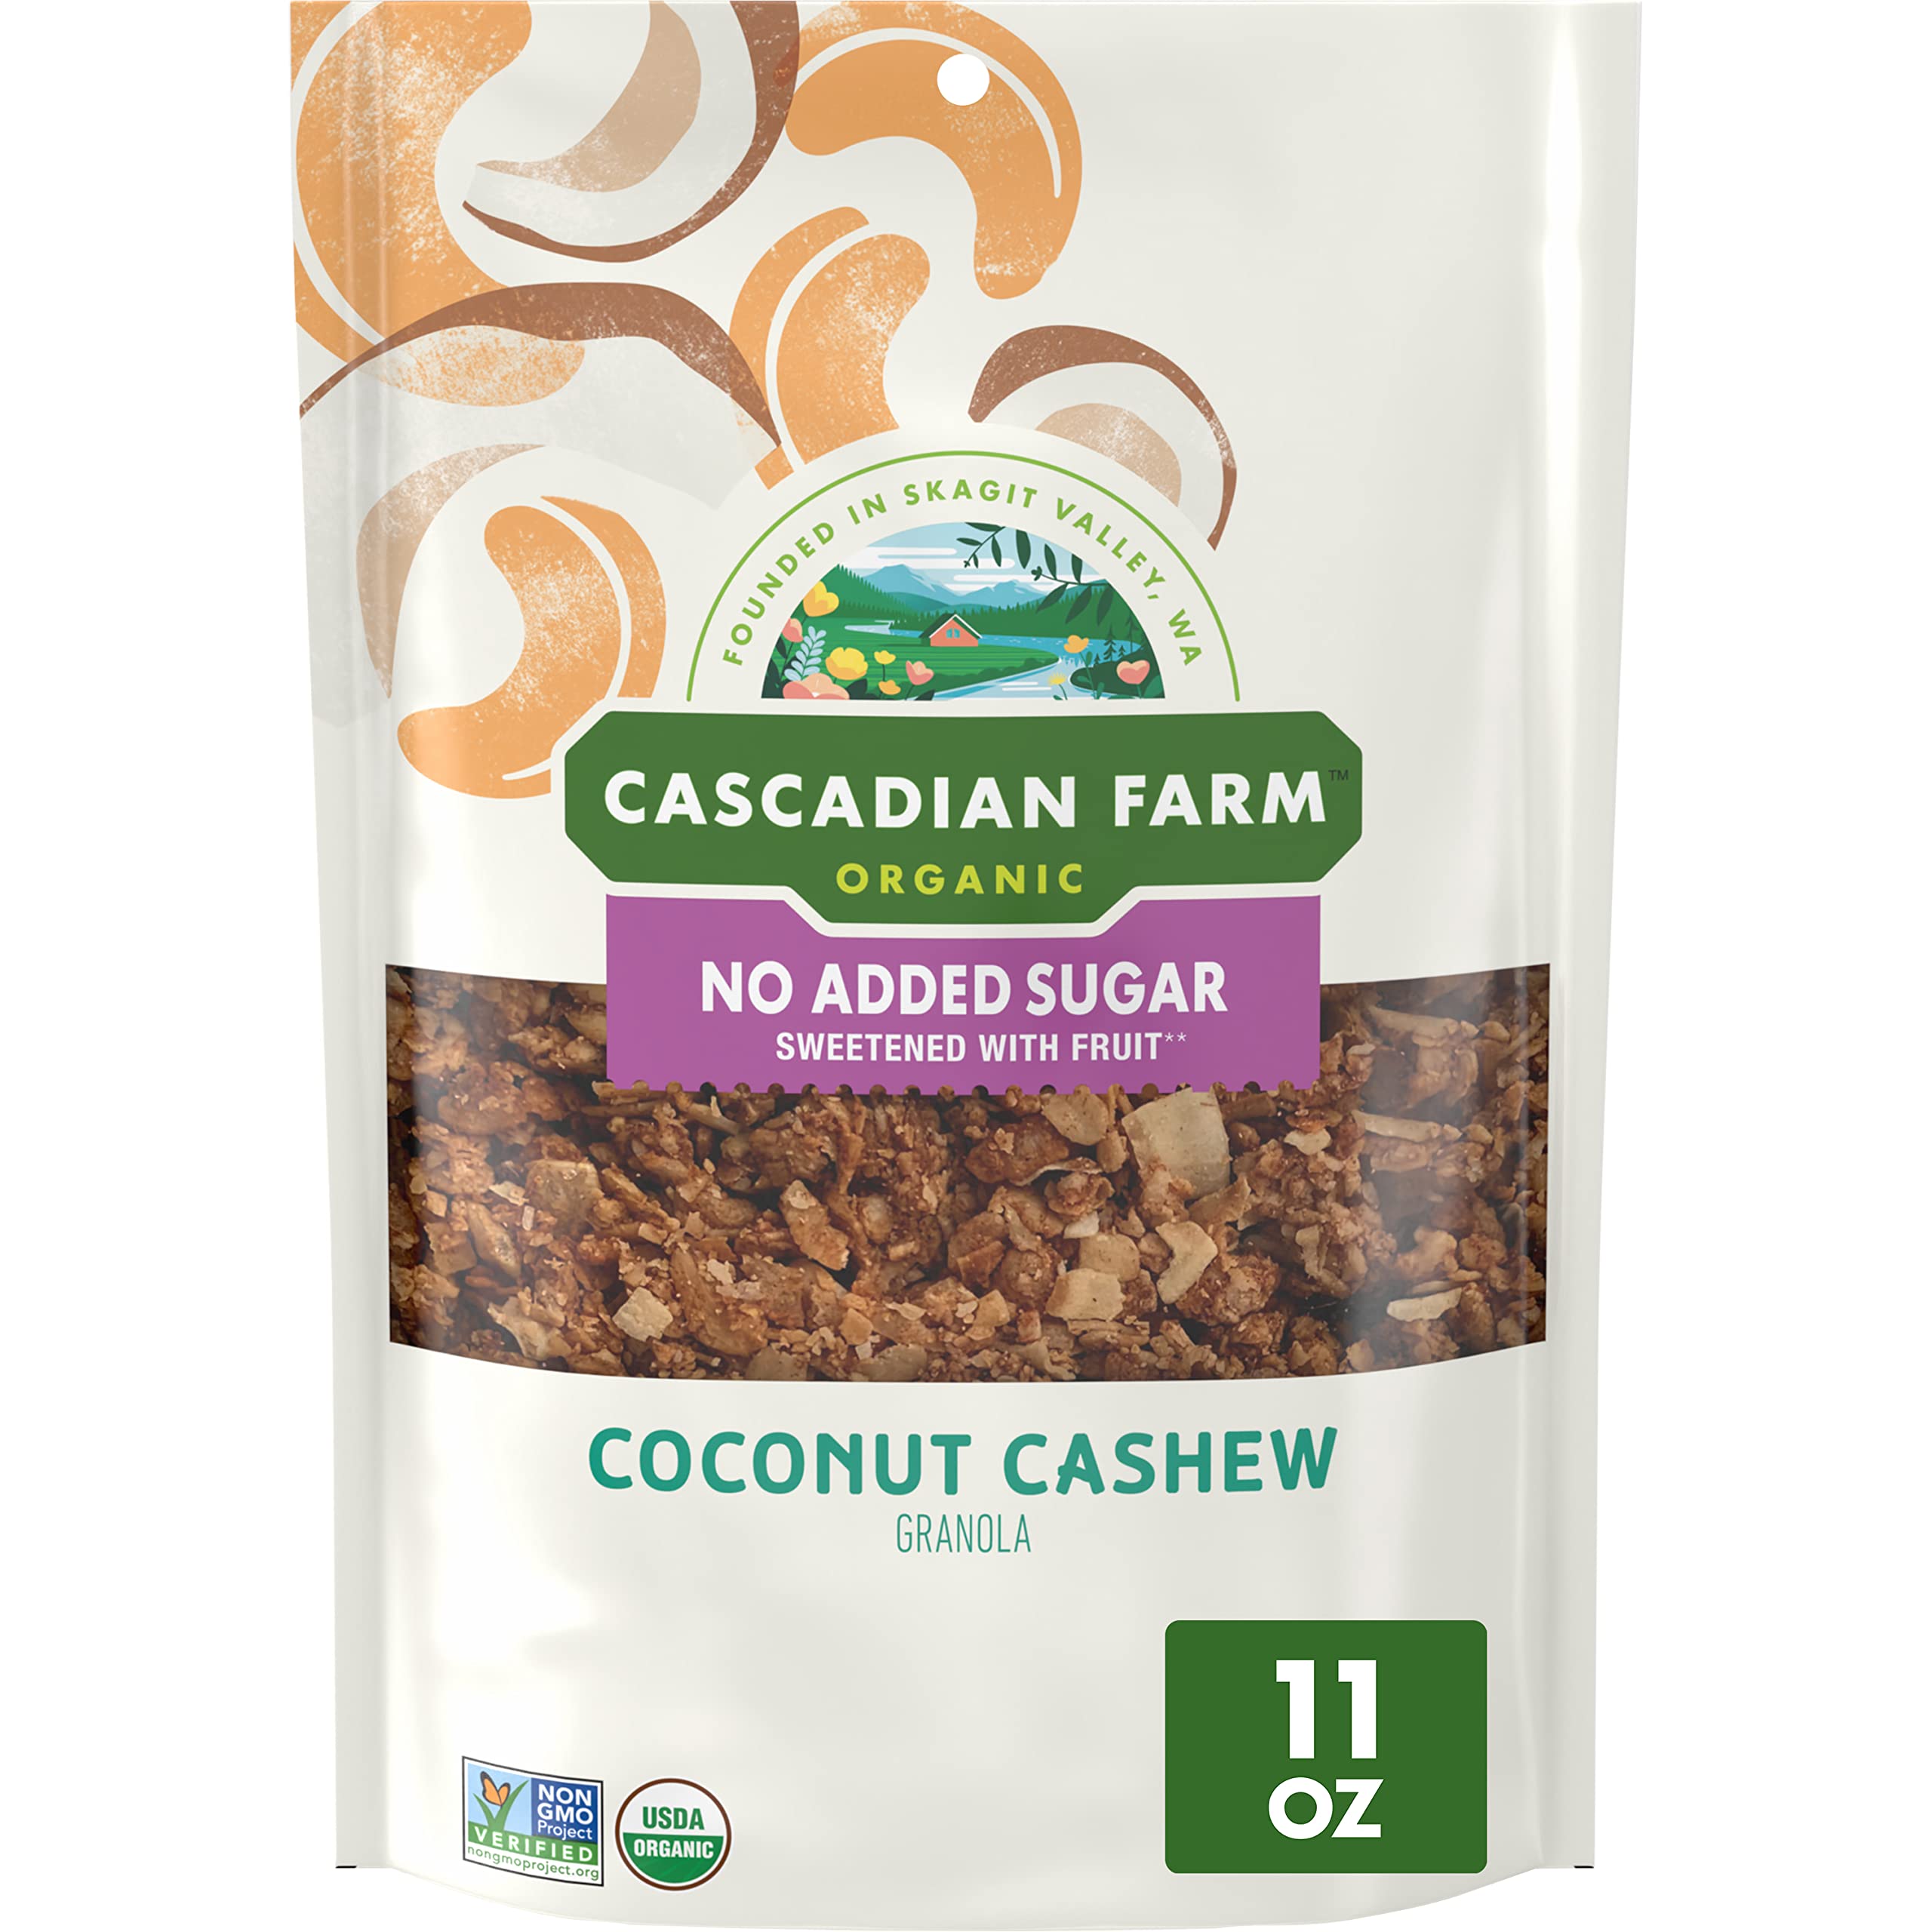 Cascadian Farm Organic Granola, Fruit and Nut Cereal, Resealable Pouch, 11 oz $2.87